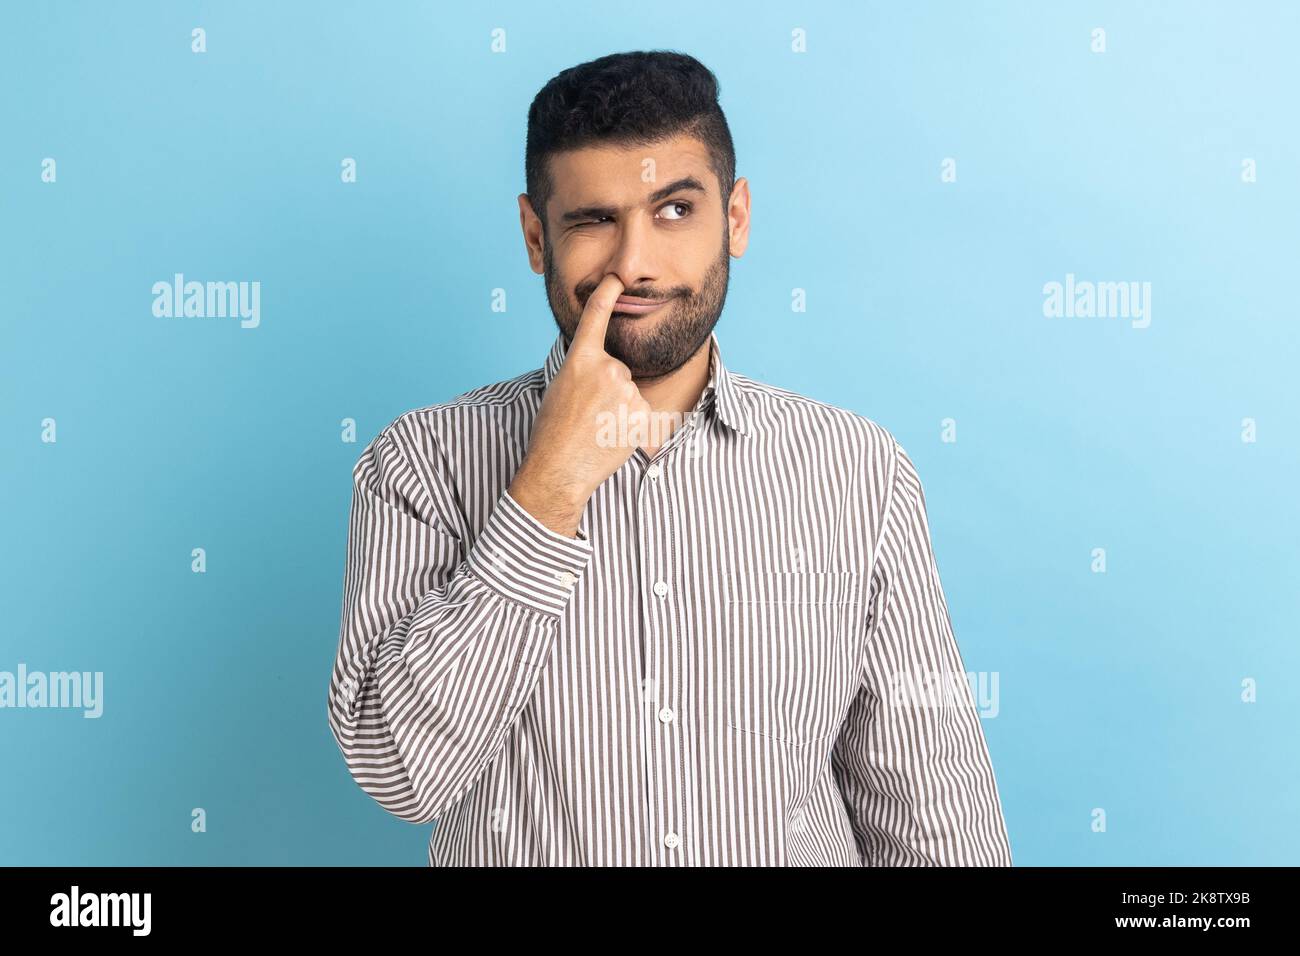 Portrait of bearded businessman putting finger into his nose, fooling around, bad habits, disrespectful behavior, wearing striped shirt. Indoor studio shot isolated on blue background. Stock Photo